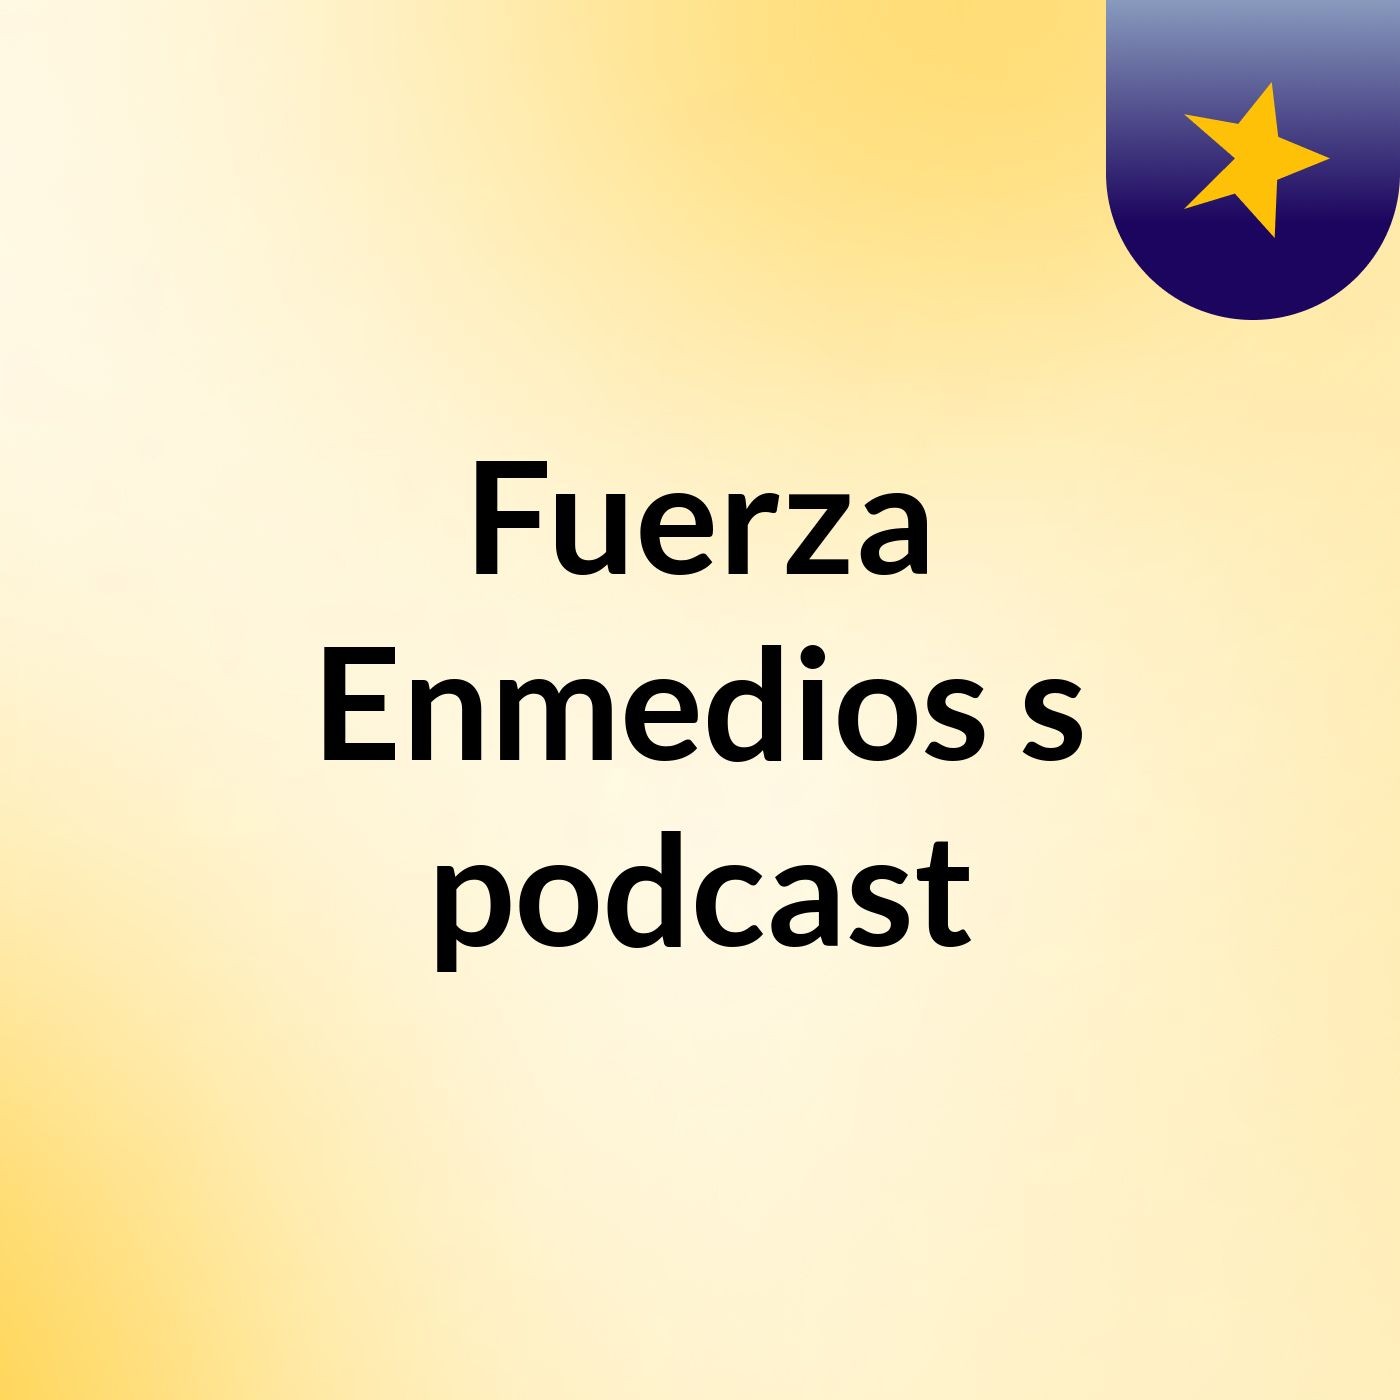 Fuerza Enmedios's podcast